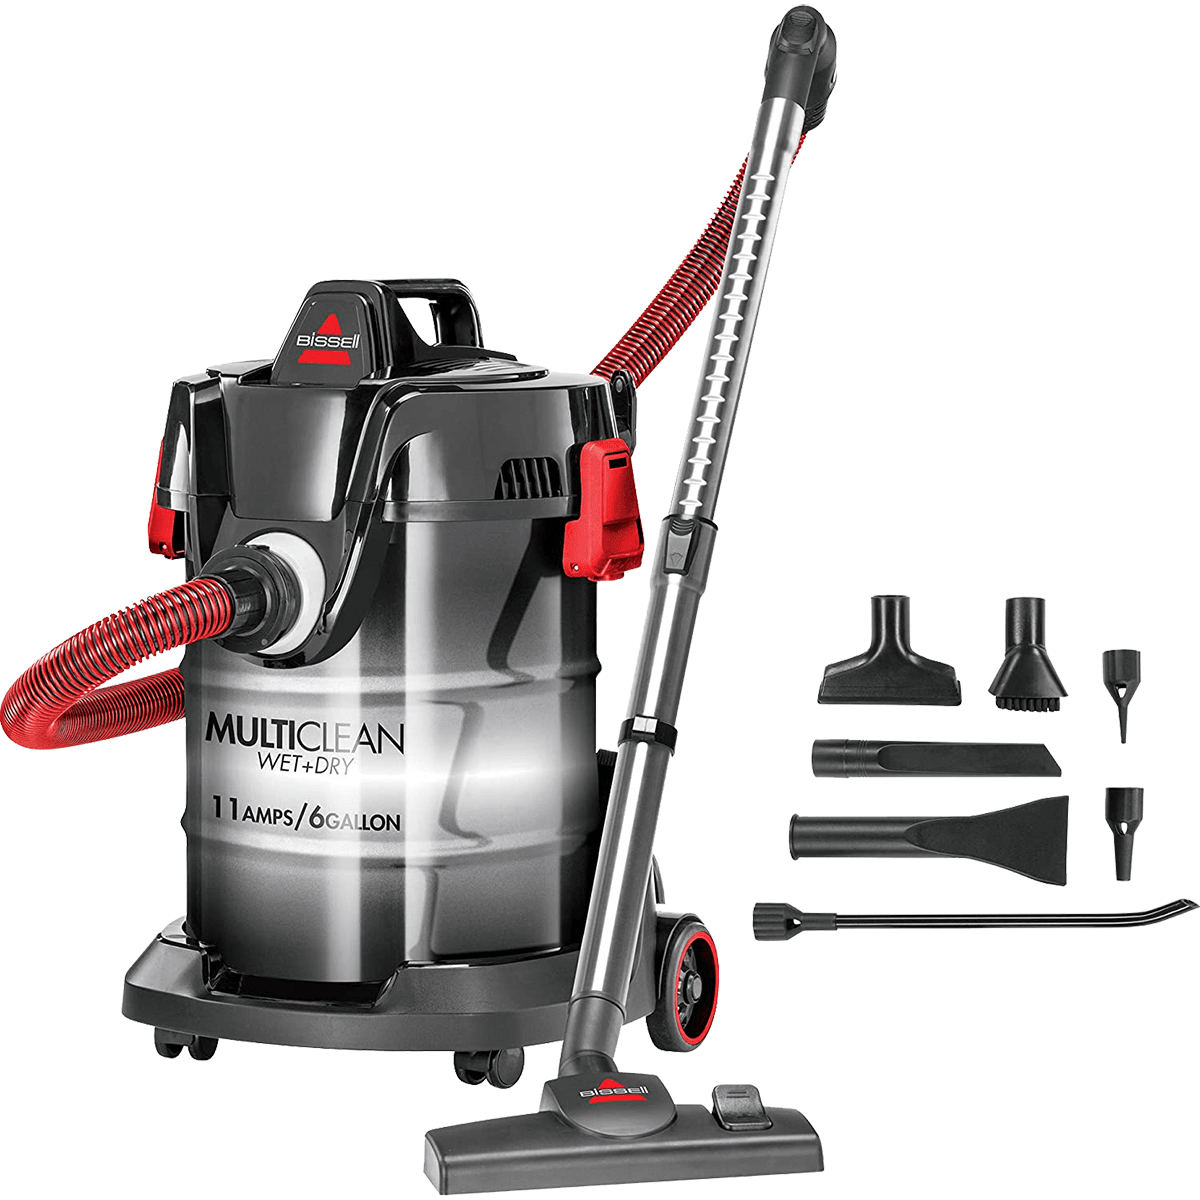 Bissell MultiClean Wet/Dry Auto Vacuum